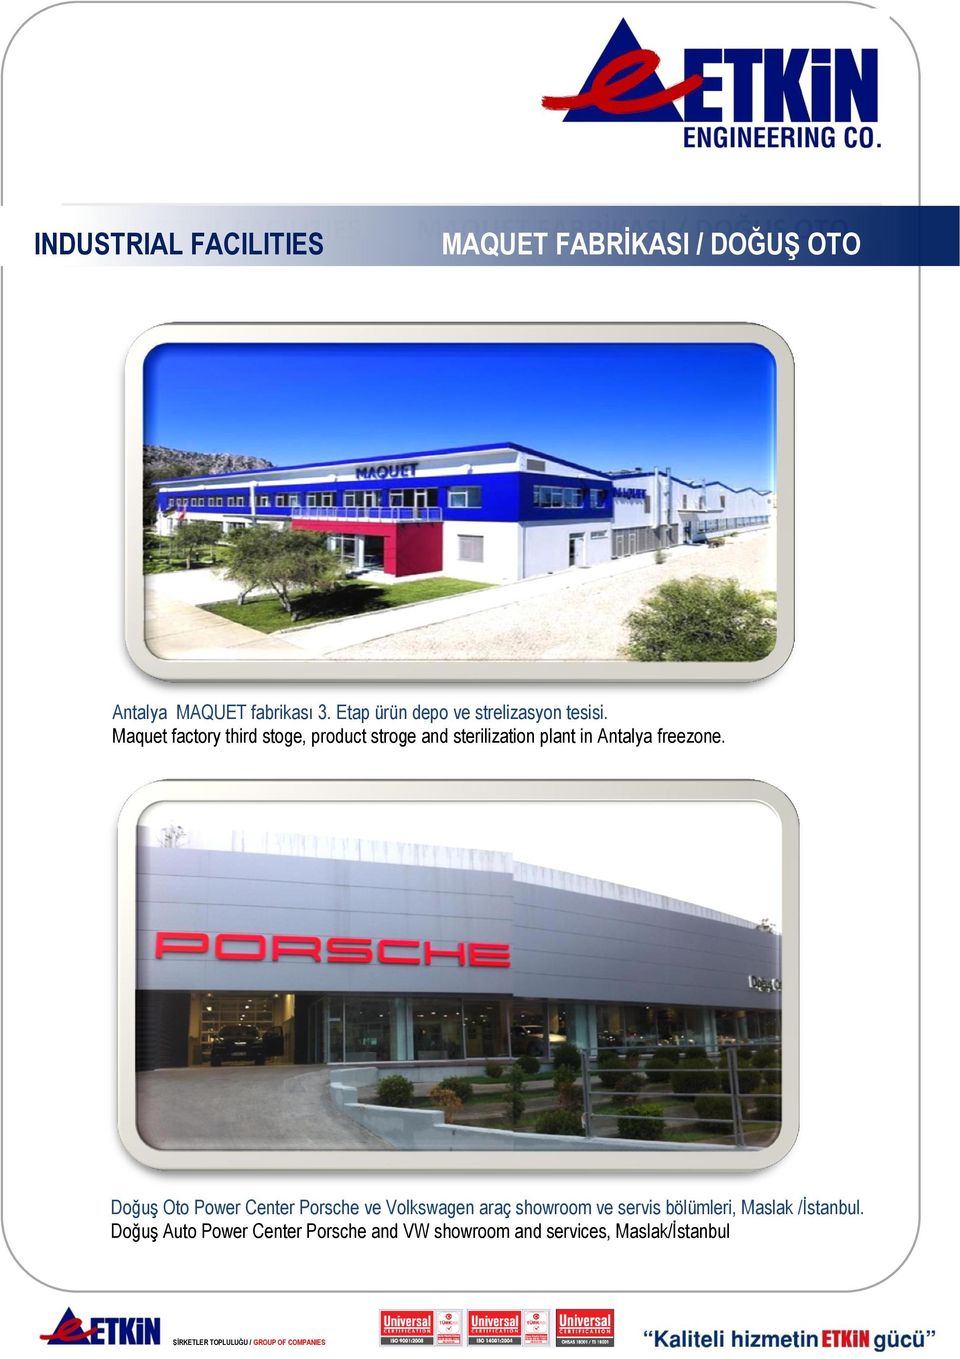 Maquet factory third stoge, product stroge and sterilization plant in Antalya freezone.